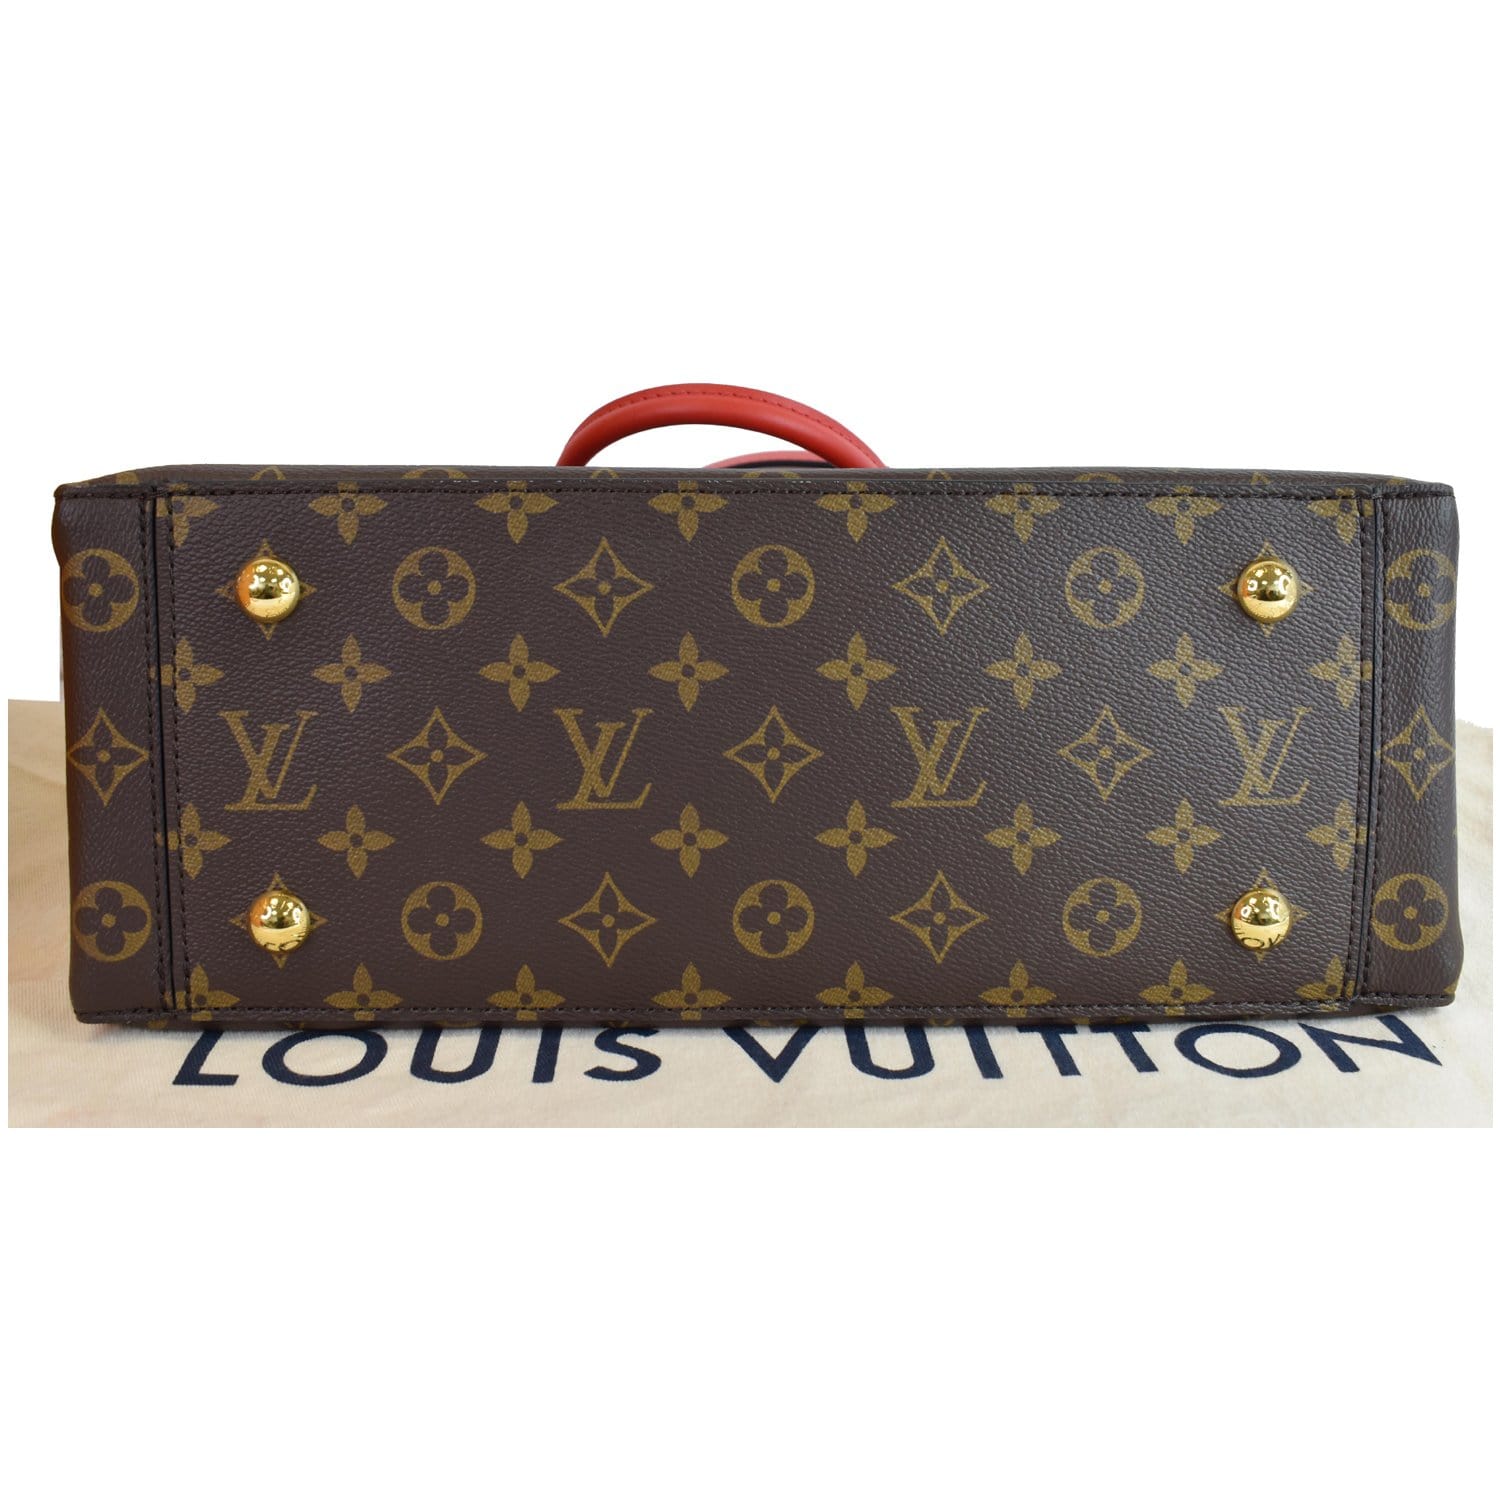 Authentic Louis Vuitton Flower Monogram Tote Red With Strap AH0189